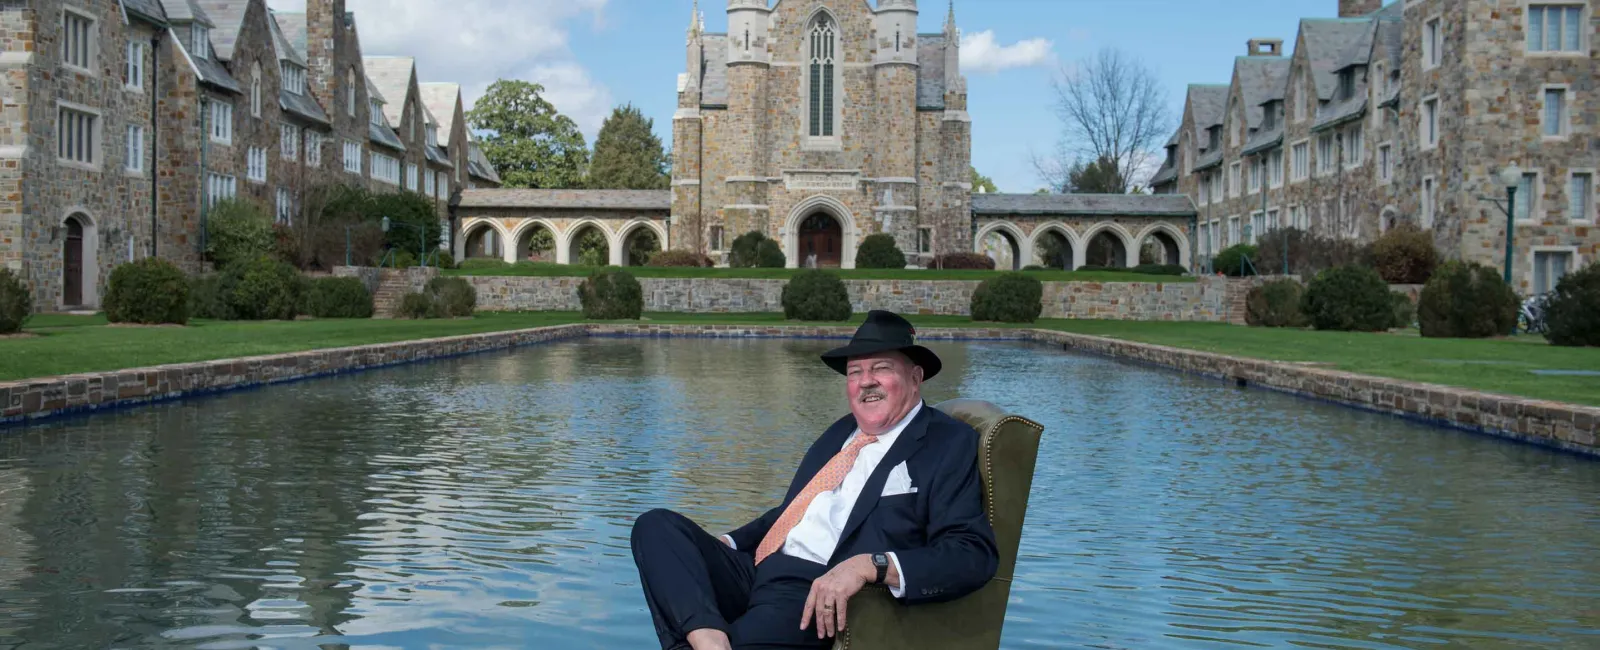 Berry alumnus sits in a chair in the reflecting pool in front of the Ford Buildings